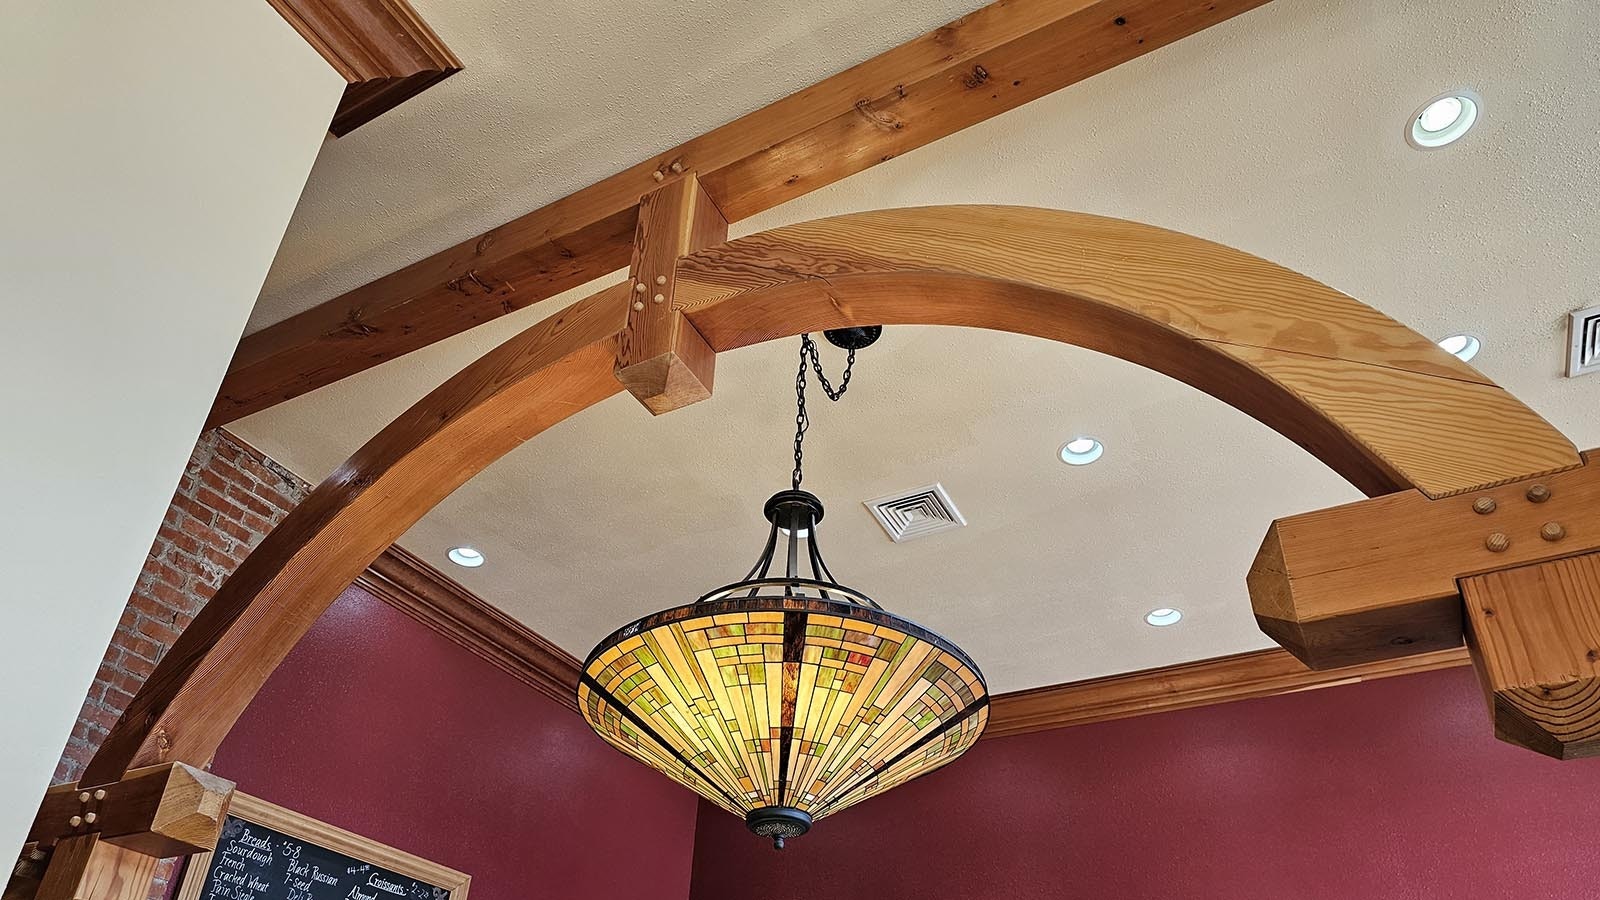 A stained glass chandelier provides soft lighting for The Bread Doctor bakery.